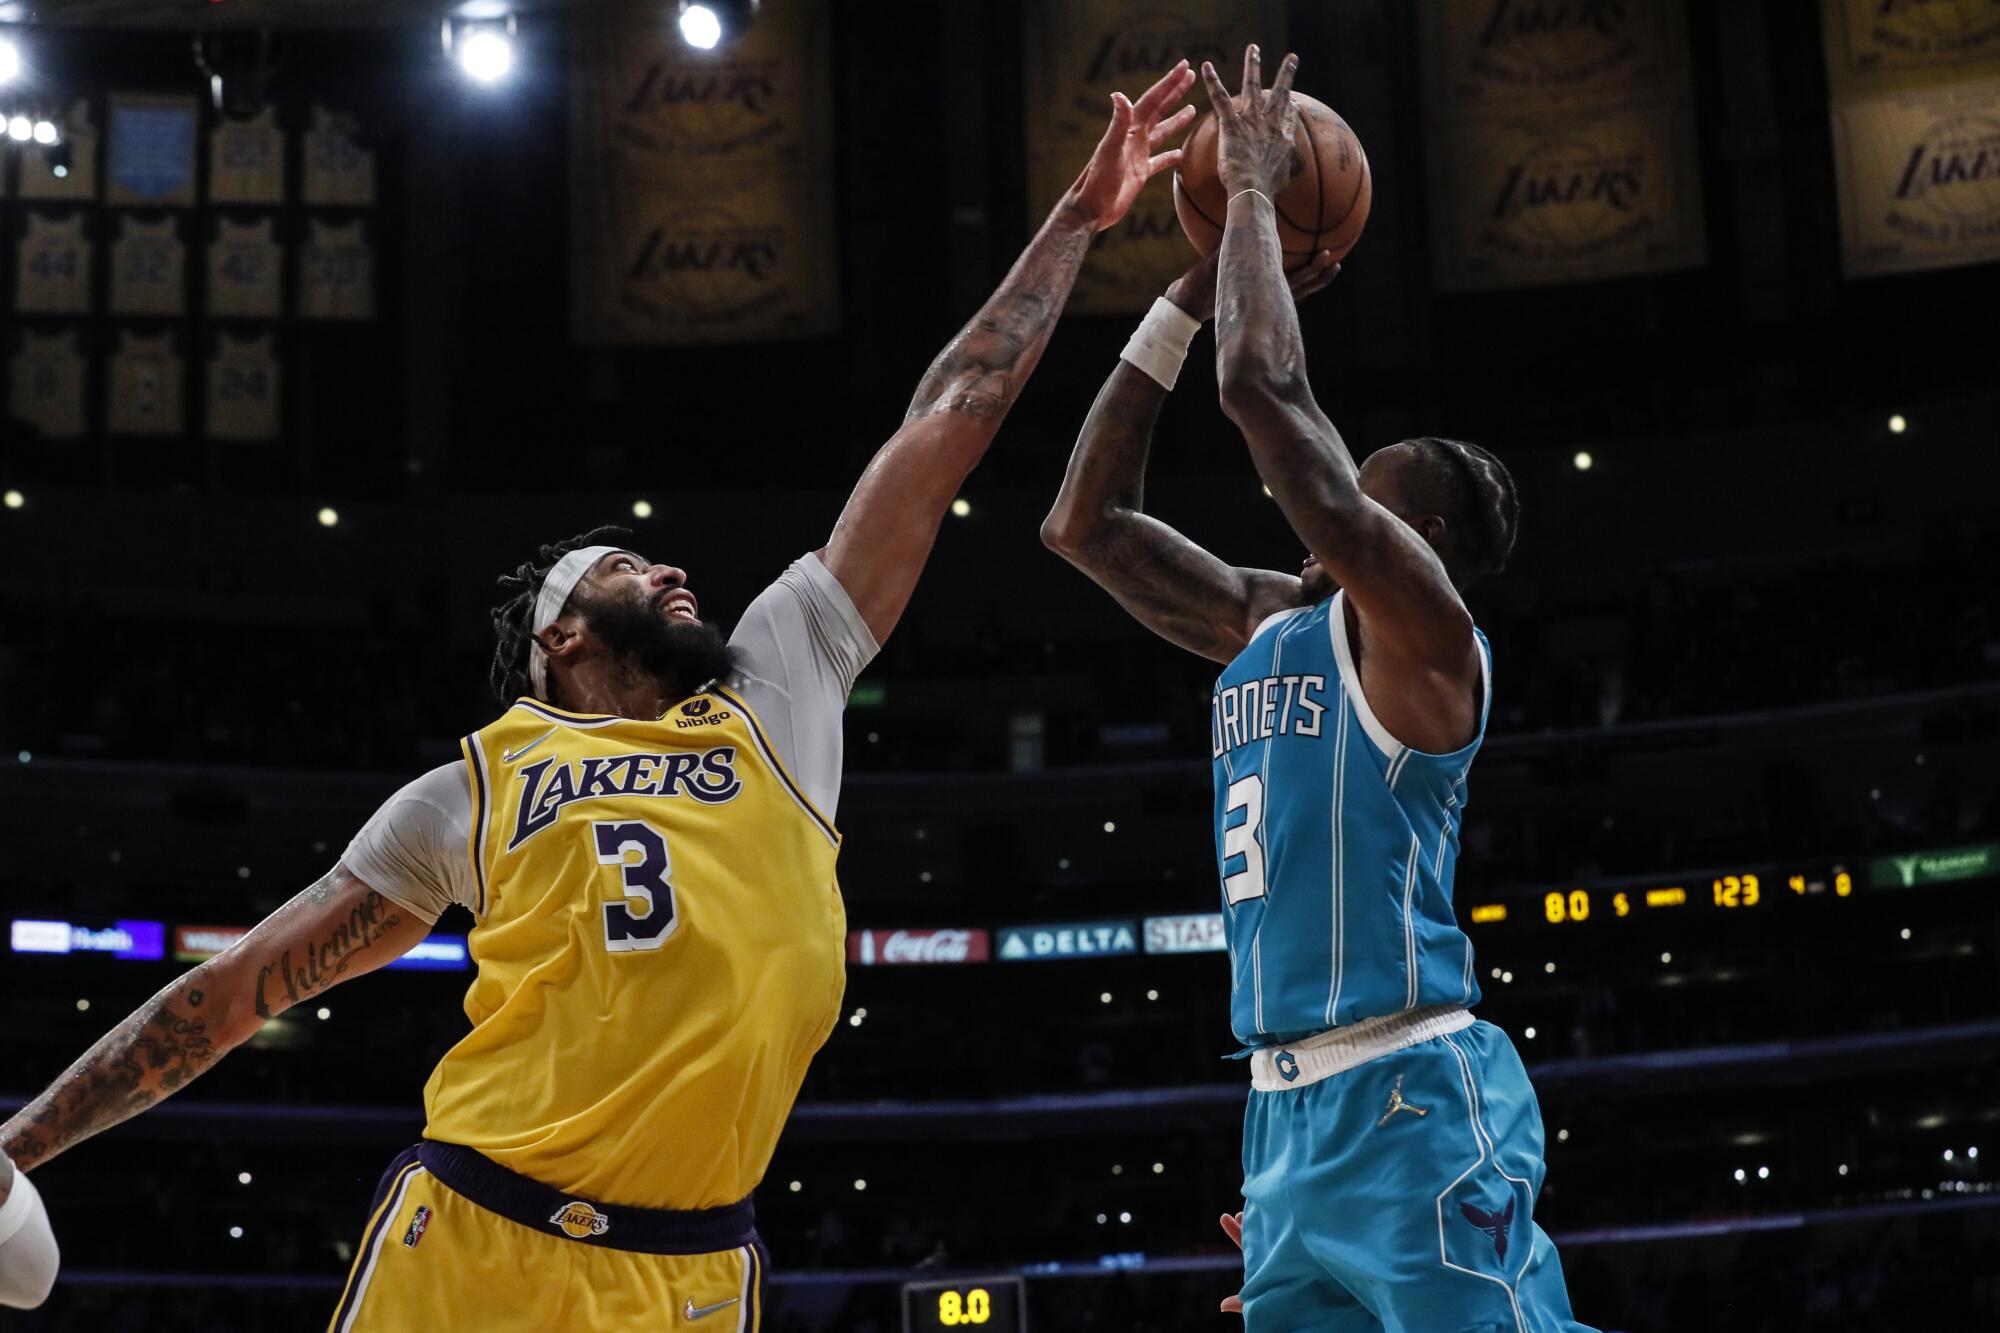 Lakers forward Anthony Davis extends his left arm as he tries to block a jump shot by Hornets guard Terry Rozier.